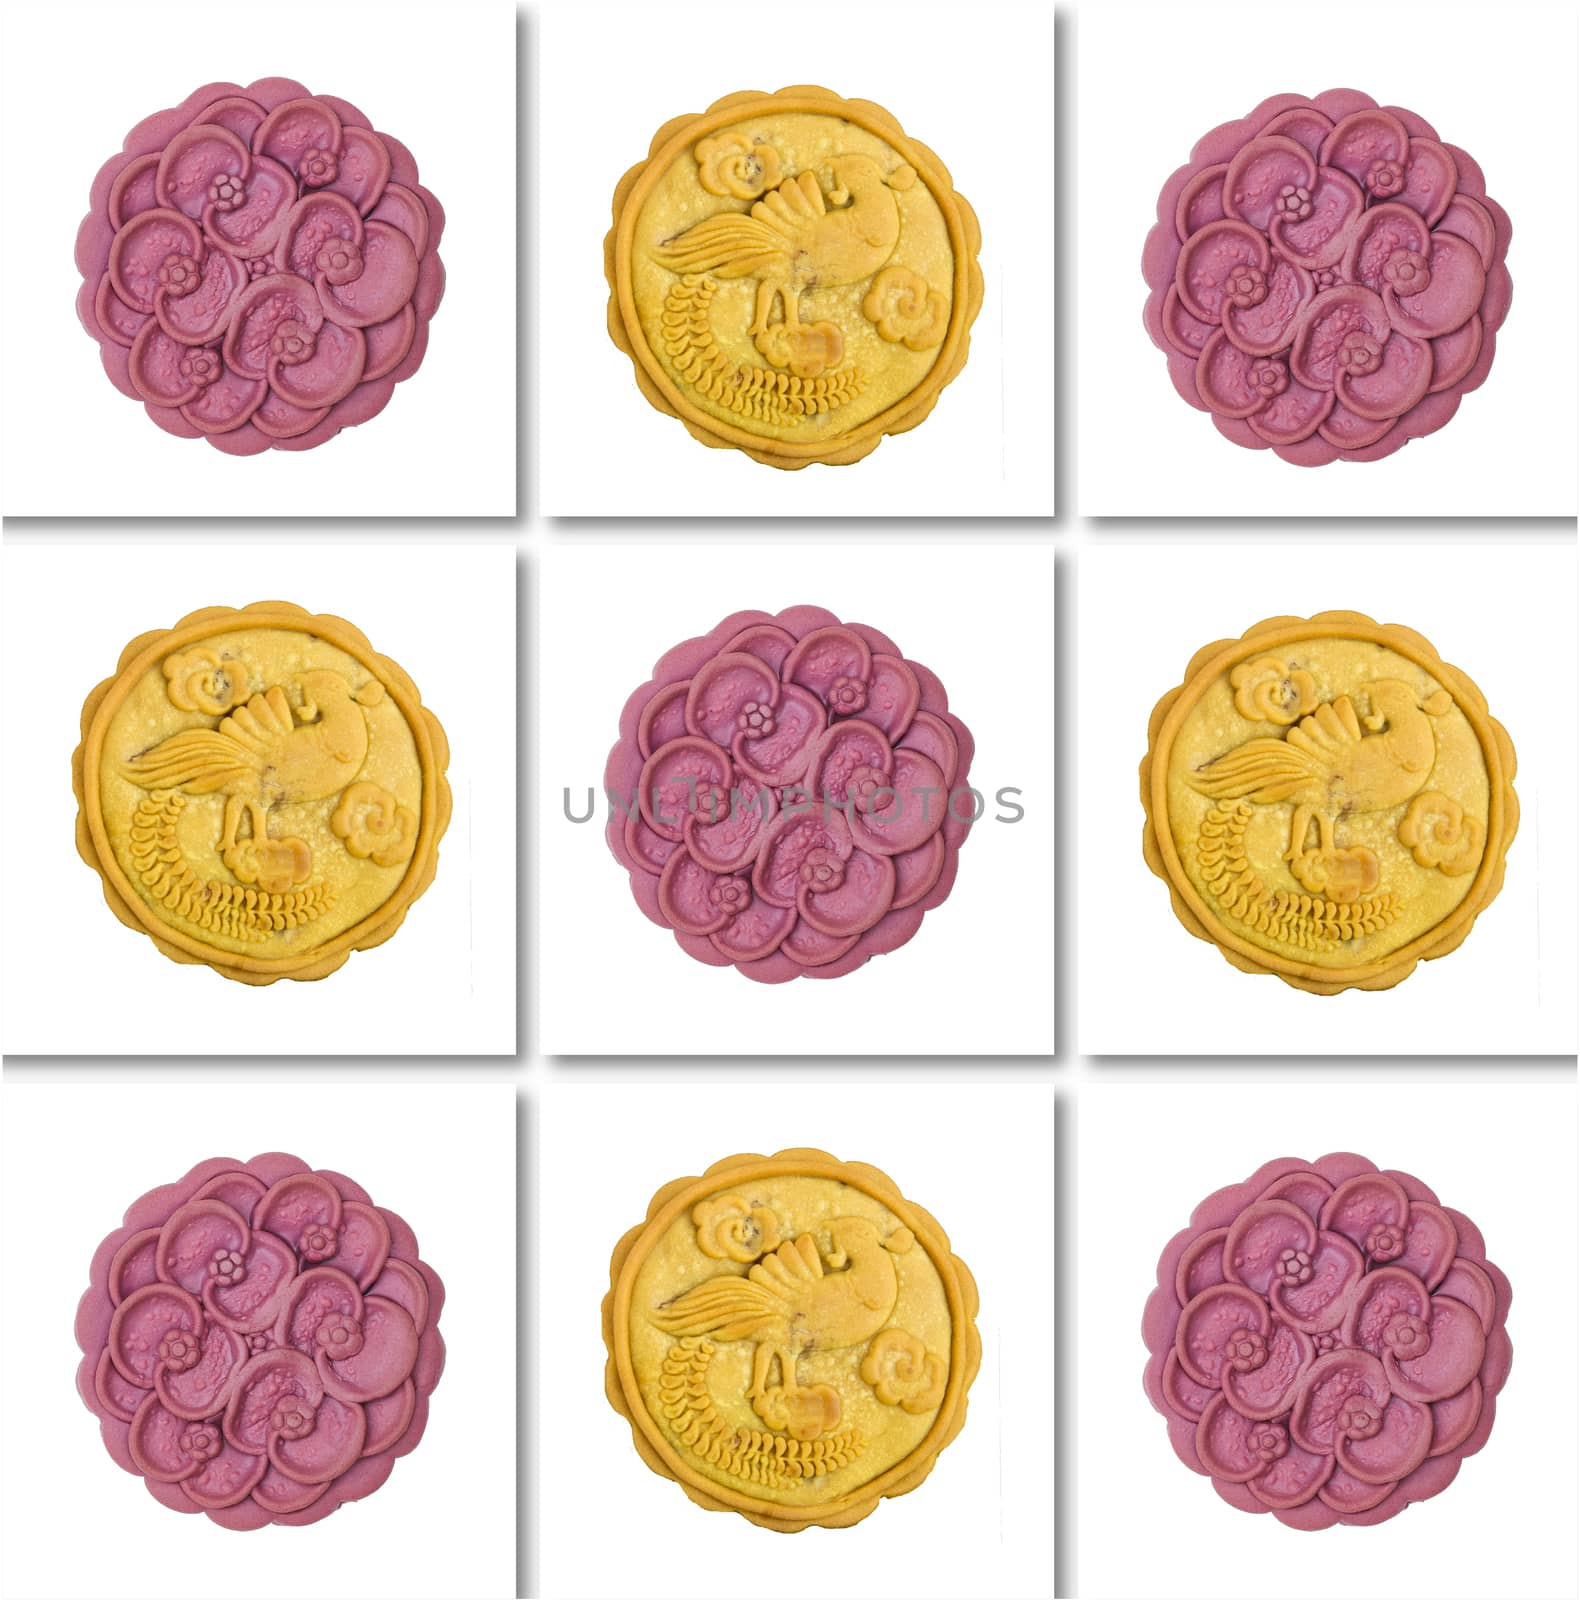 Traditional (beans, nuts and preserved fruits) versus non-traditional (sweet purple japanese yam) moon cakes on white tiles. Illustration art.